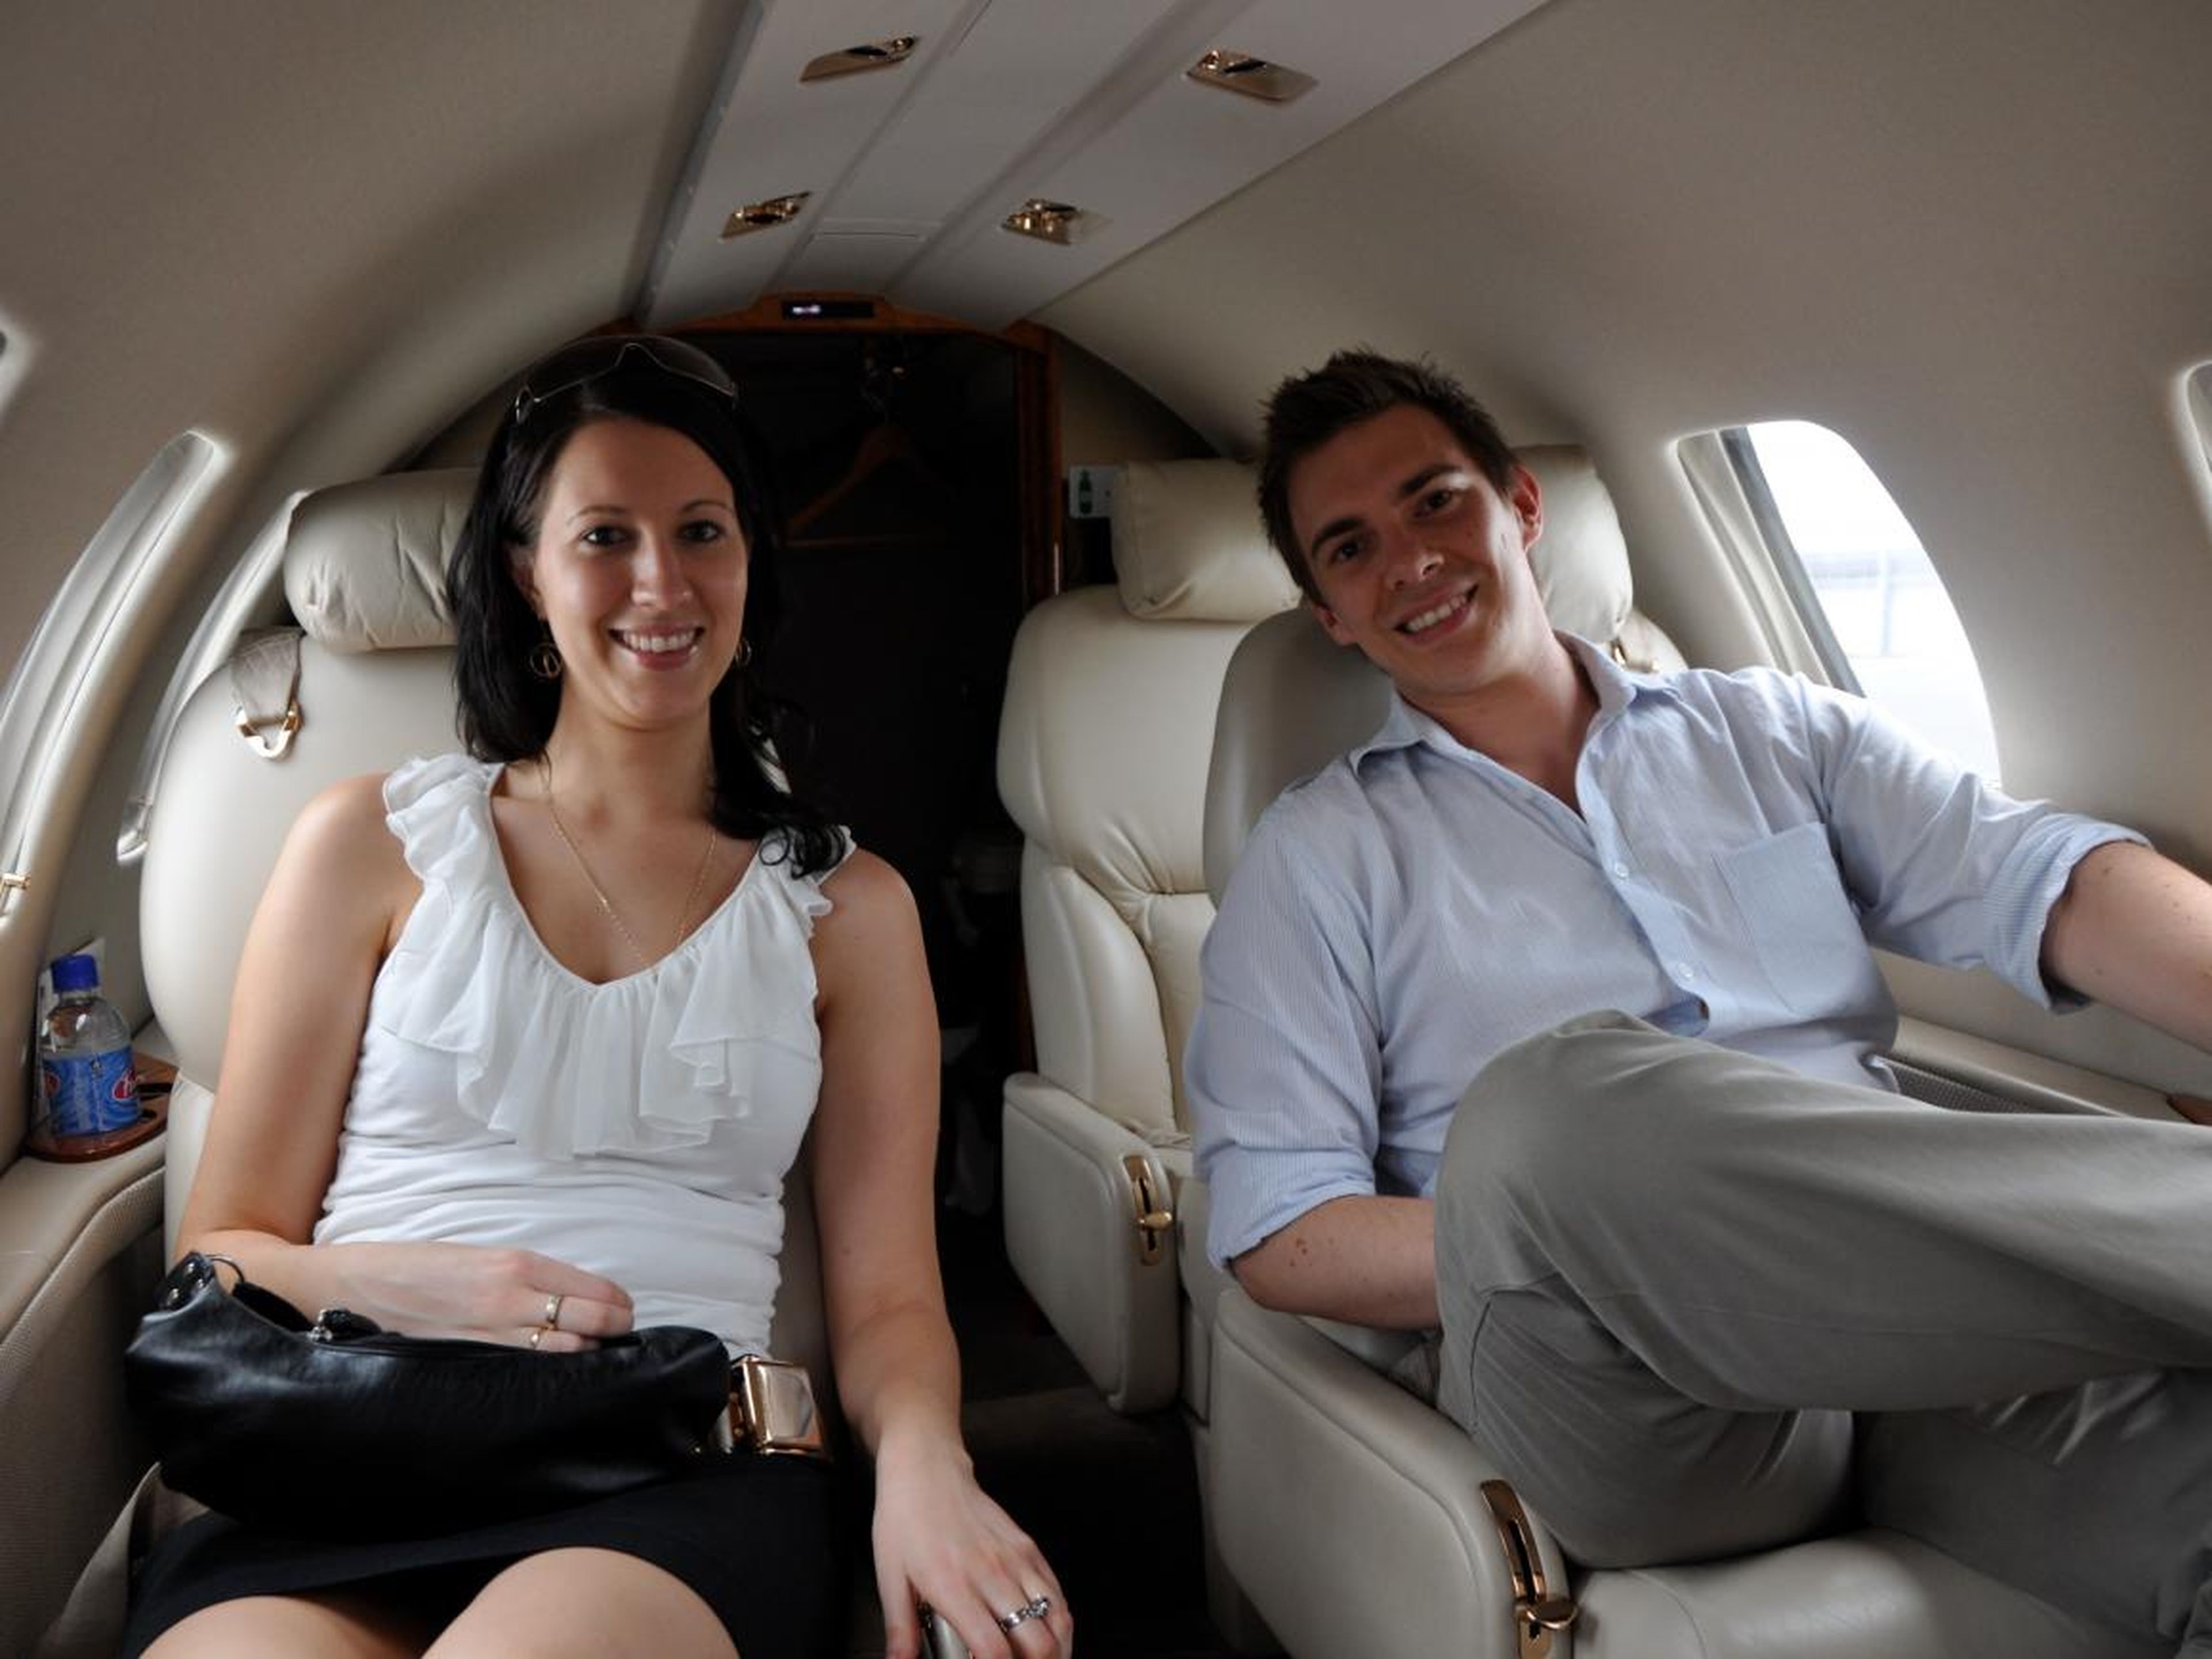 If you aren't a world leader or a billionaire, you can still charter a ride in a private jet — but it'll cost you.